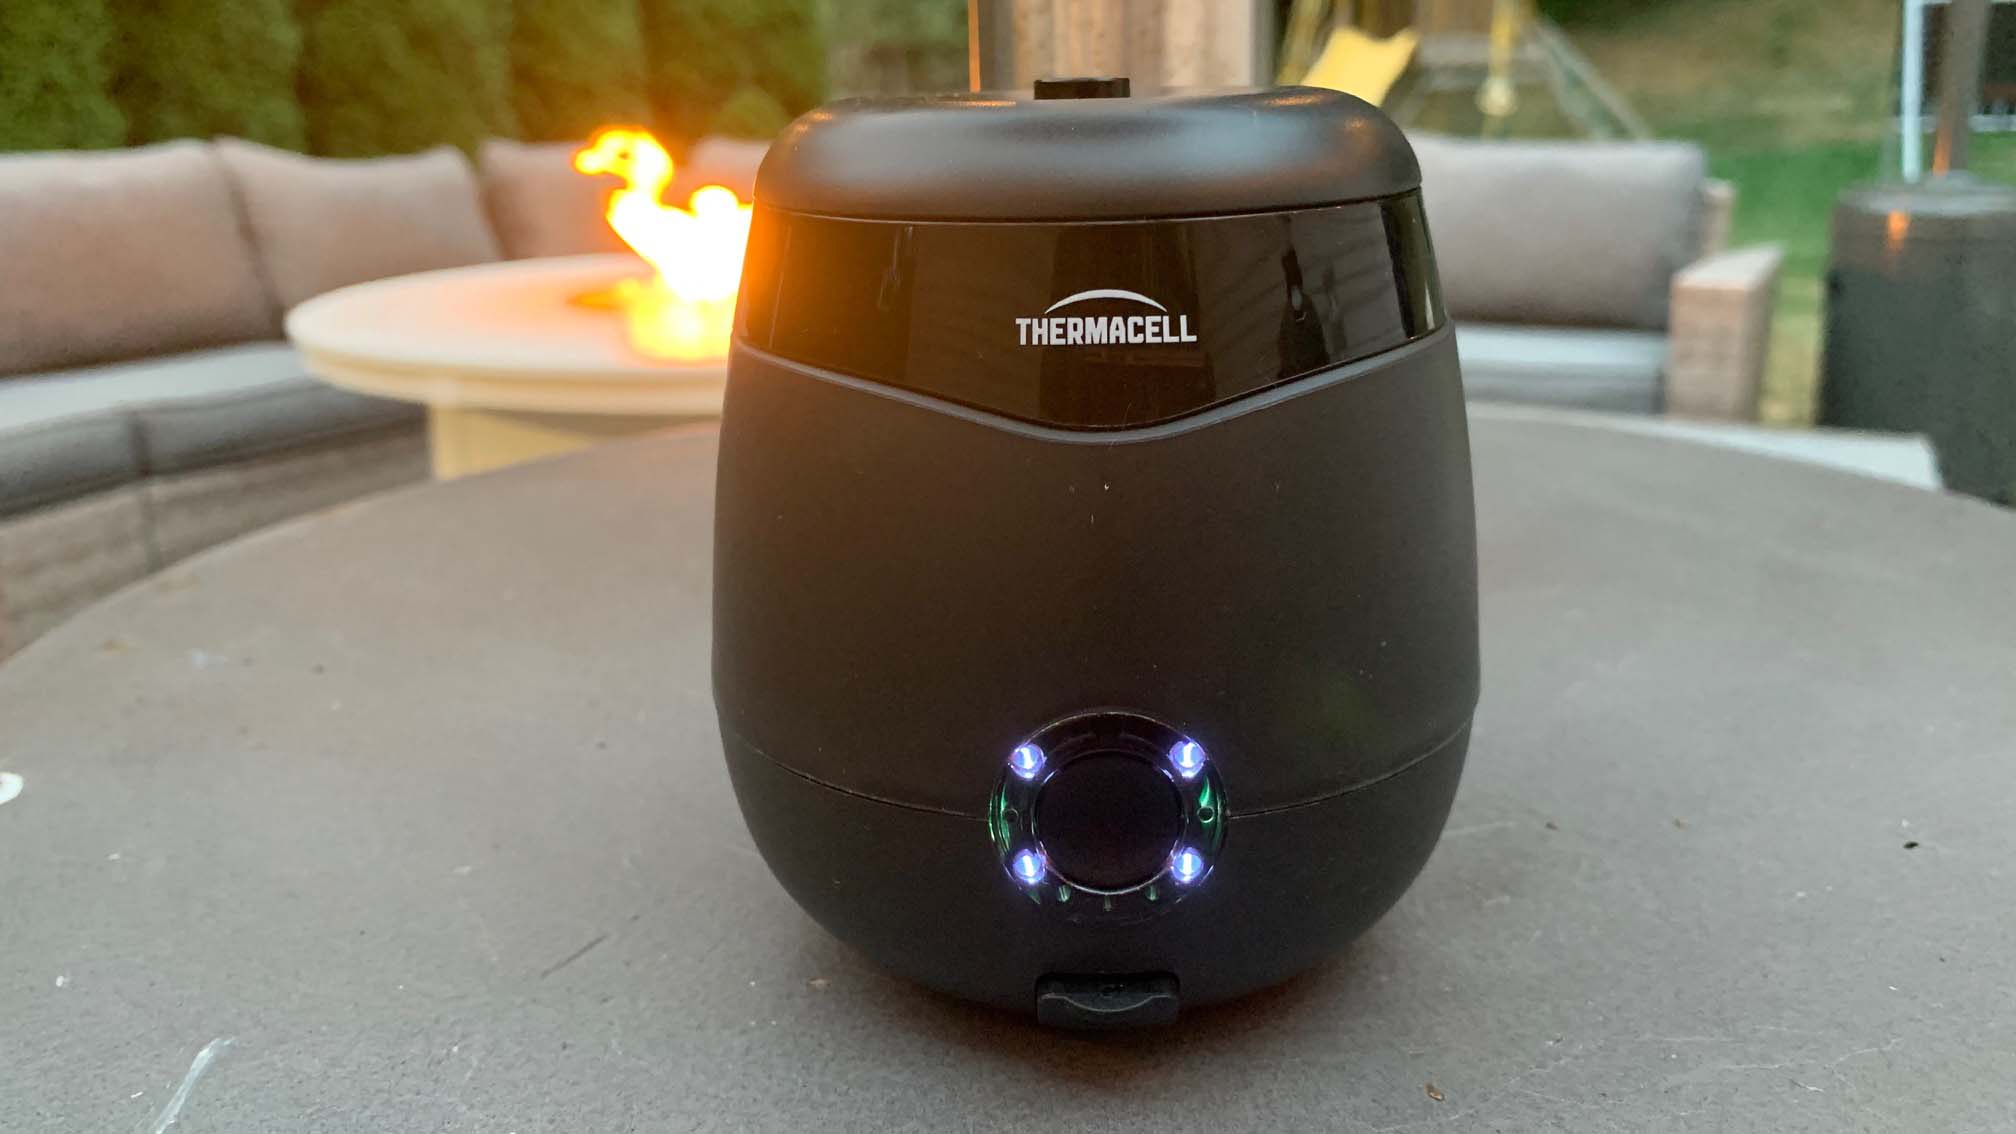 Why We Love Thermacell Mosquito Control Gear